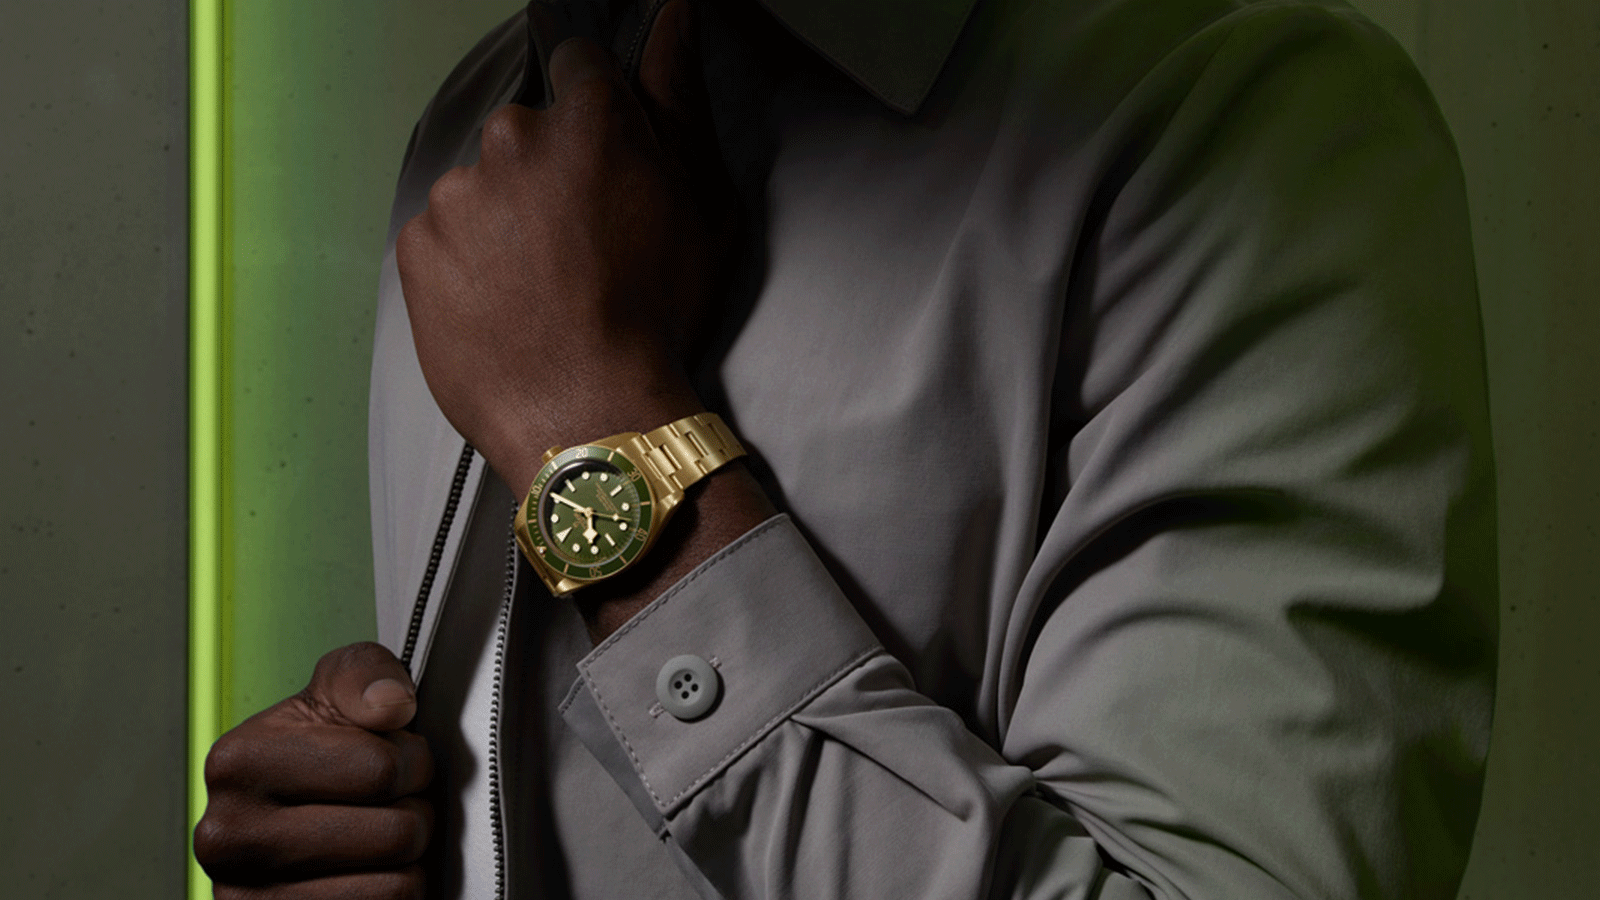 Meet the new TUDOR Black Bay 58 18K, featuring a 39mm gold case, solid gold 3-link bracelet, "golden green" dial and bezel and a COSC-certified Manufacture Calibre with a five-year guarantee.